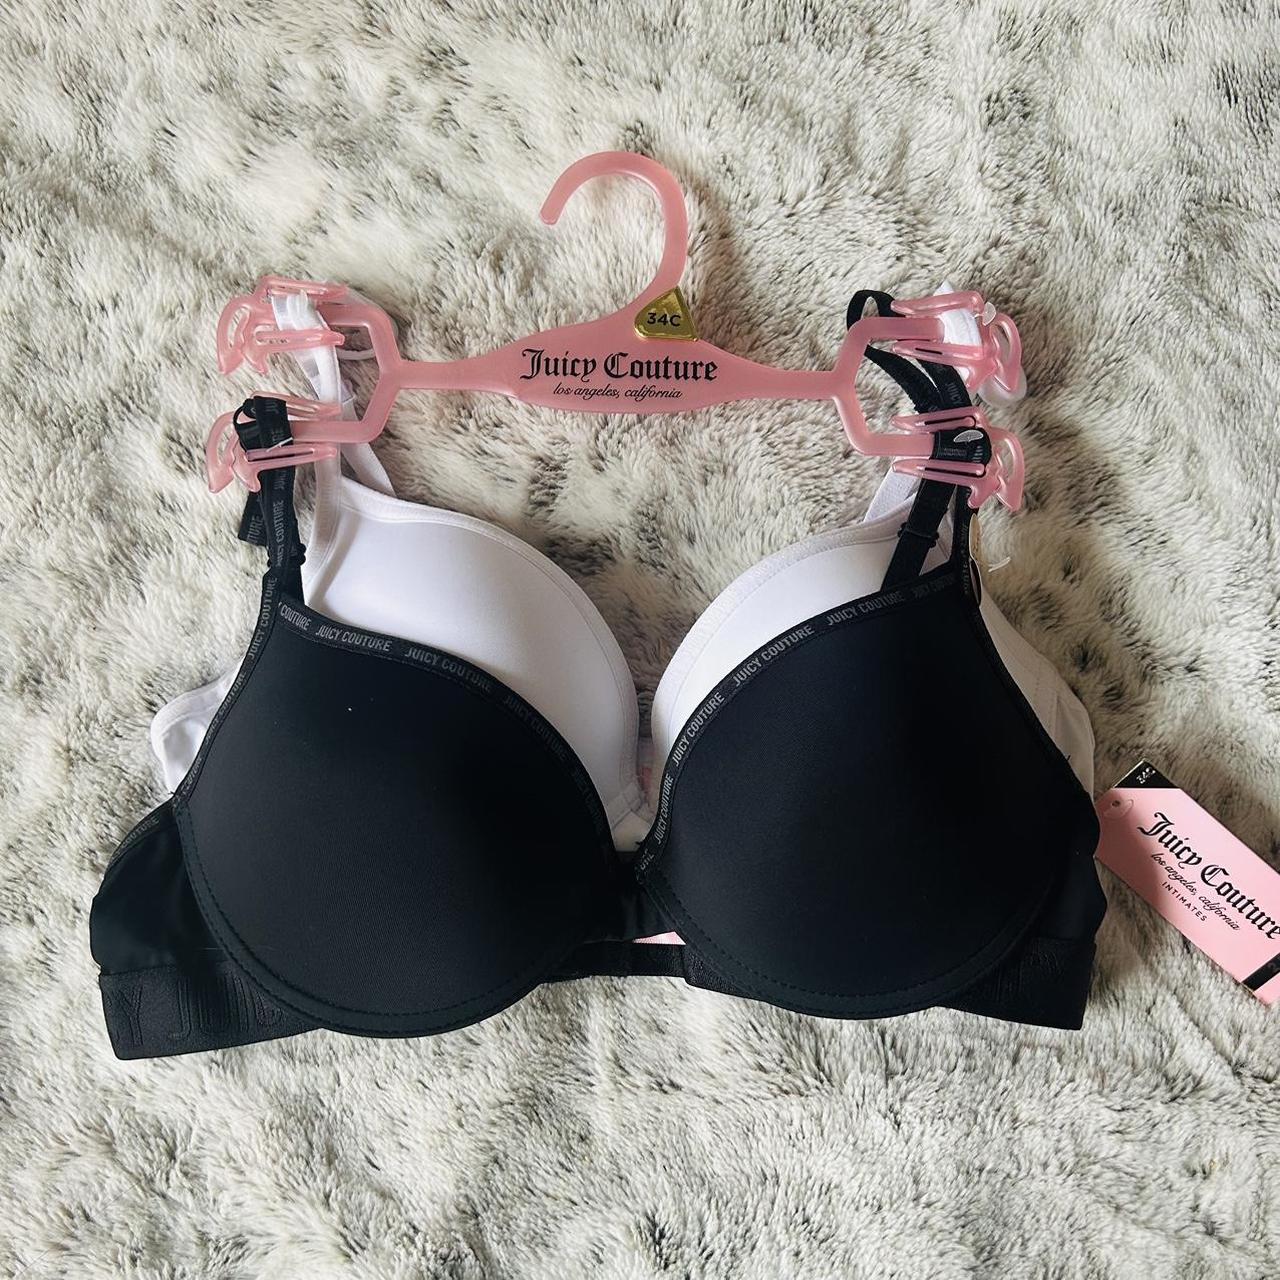 Great Condition Lace Bra Pink 34C BRAND IS SOMA - Depop